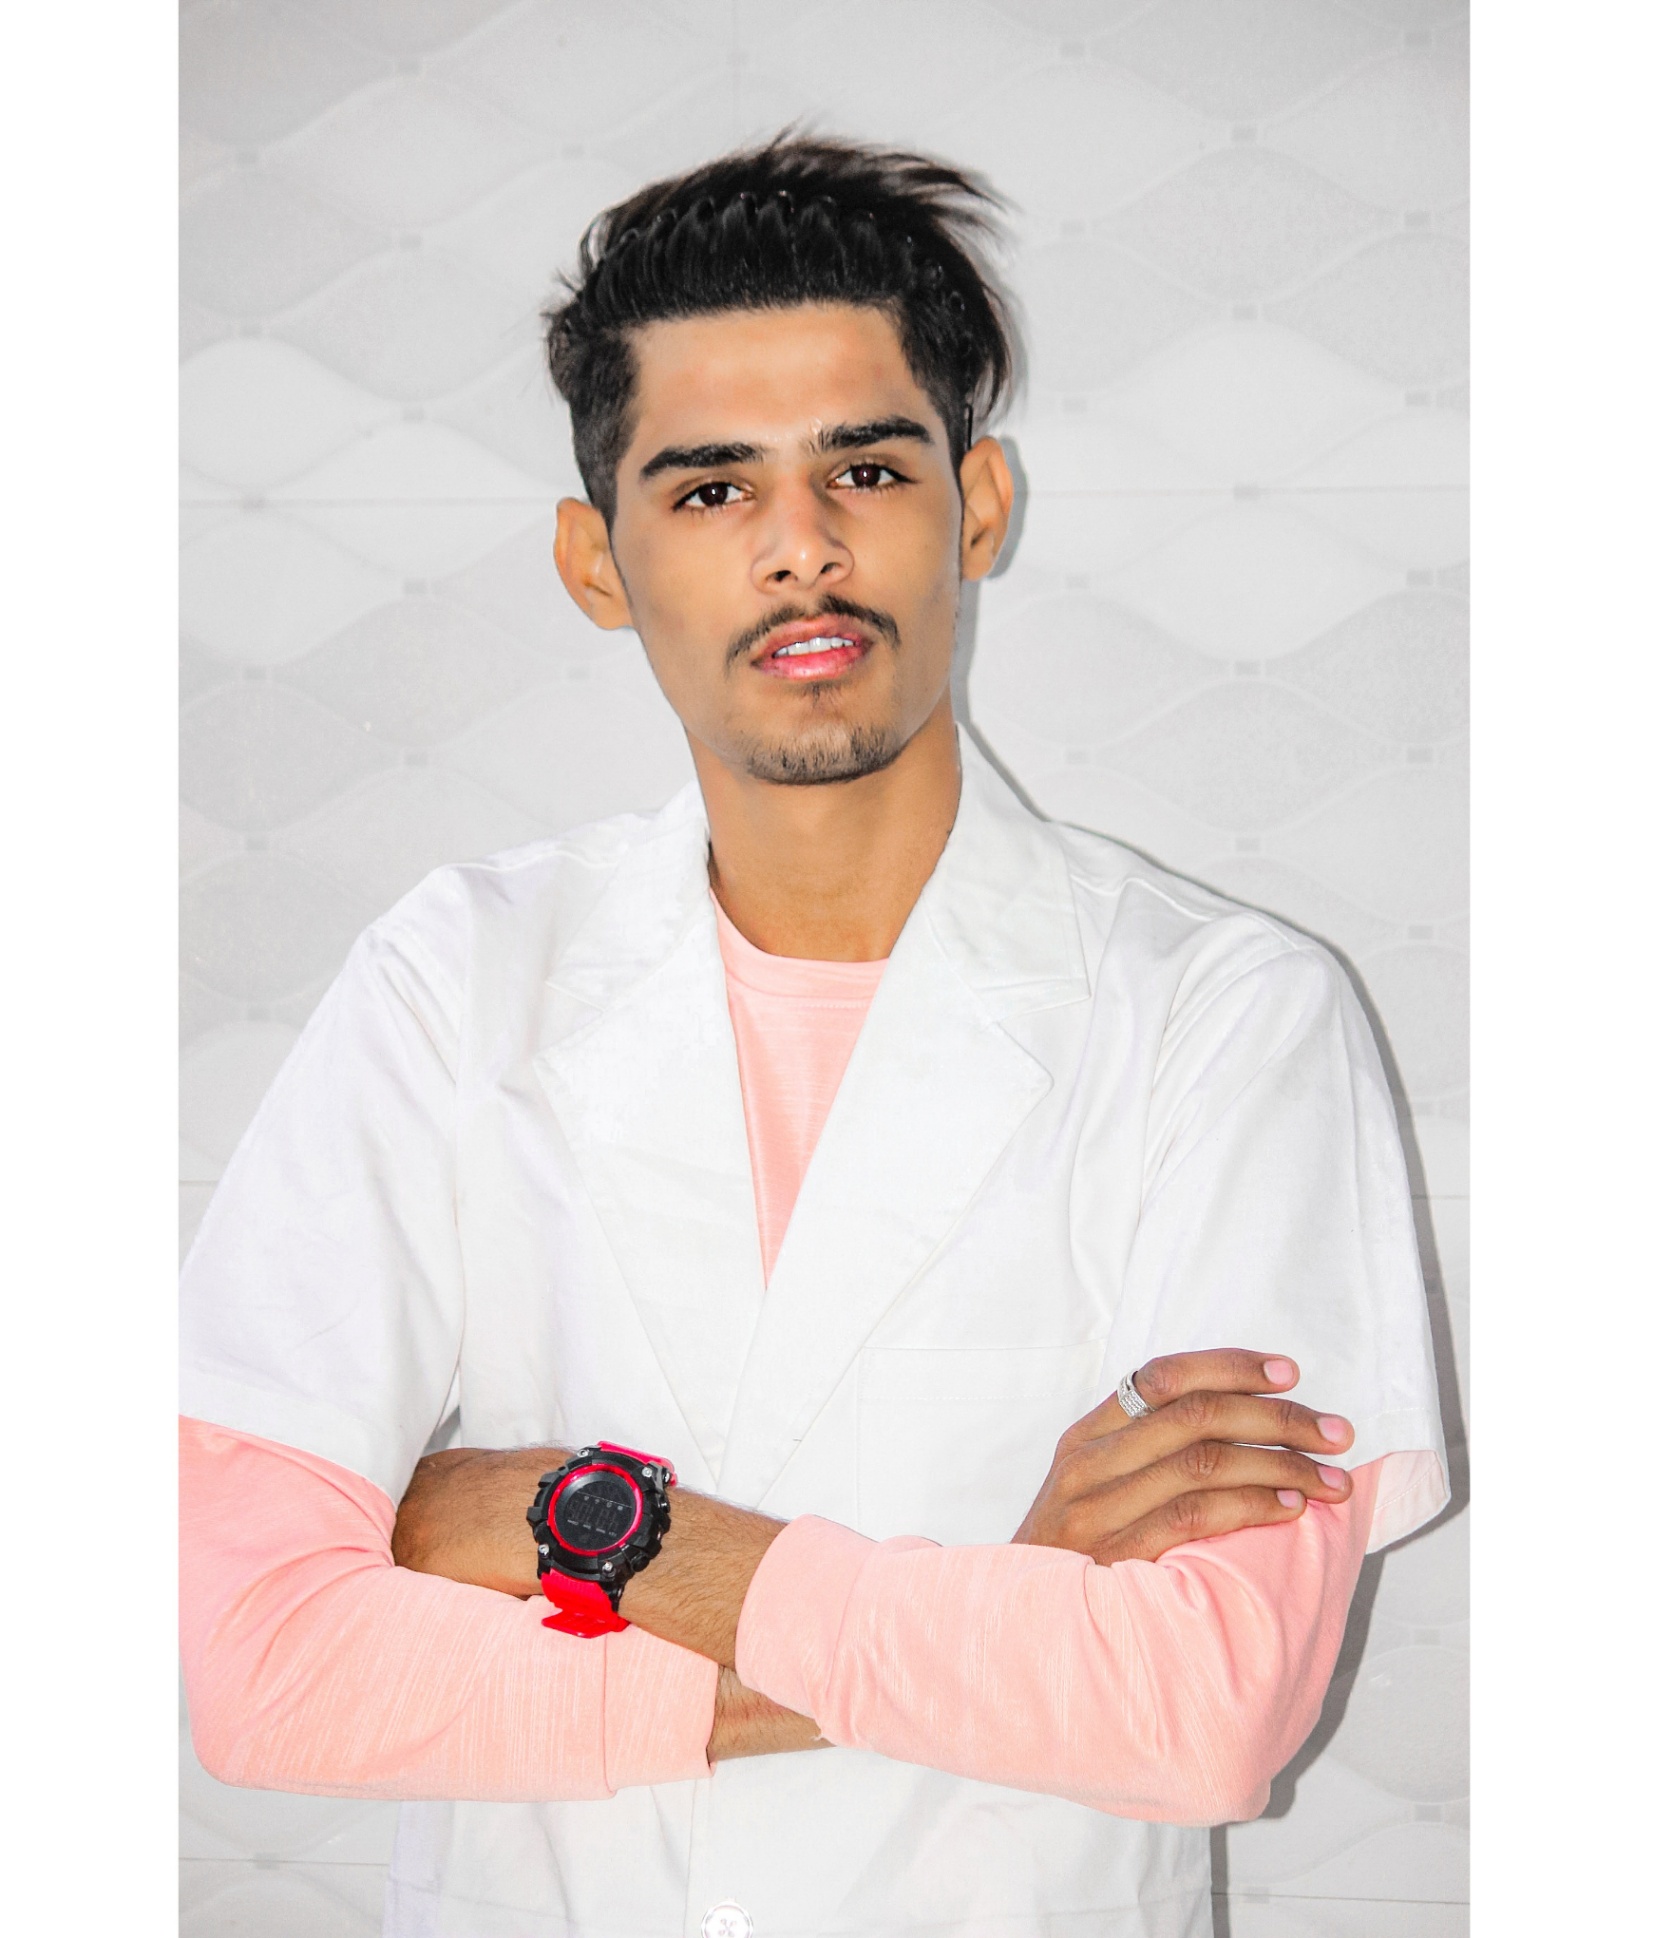 Dr. Aamir Physiotherapist 